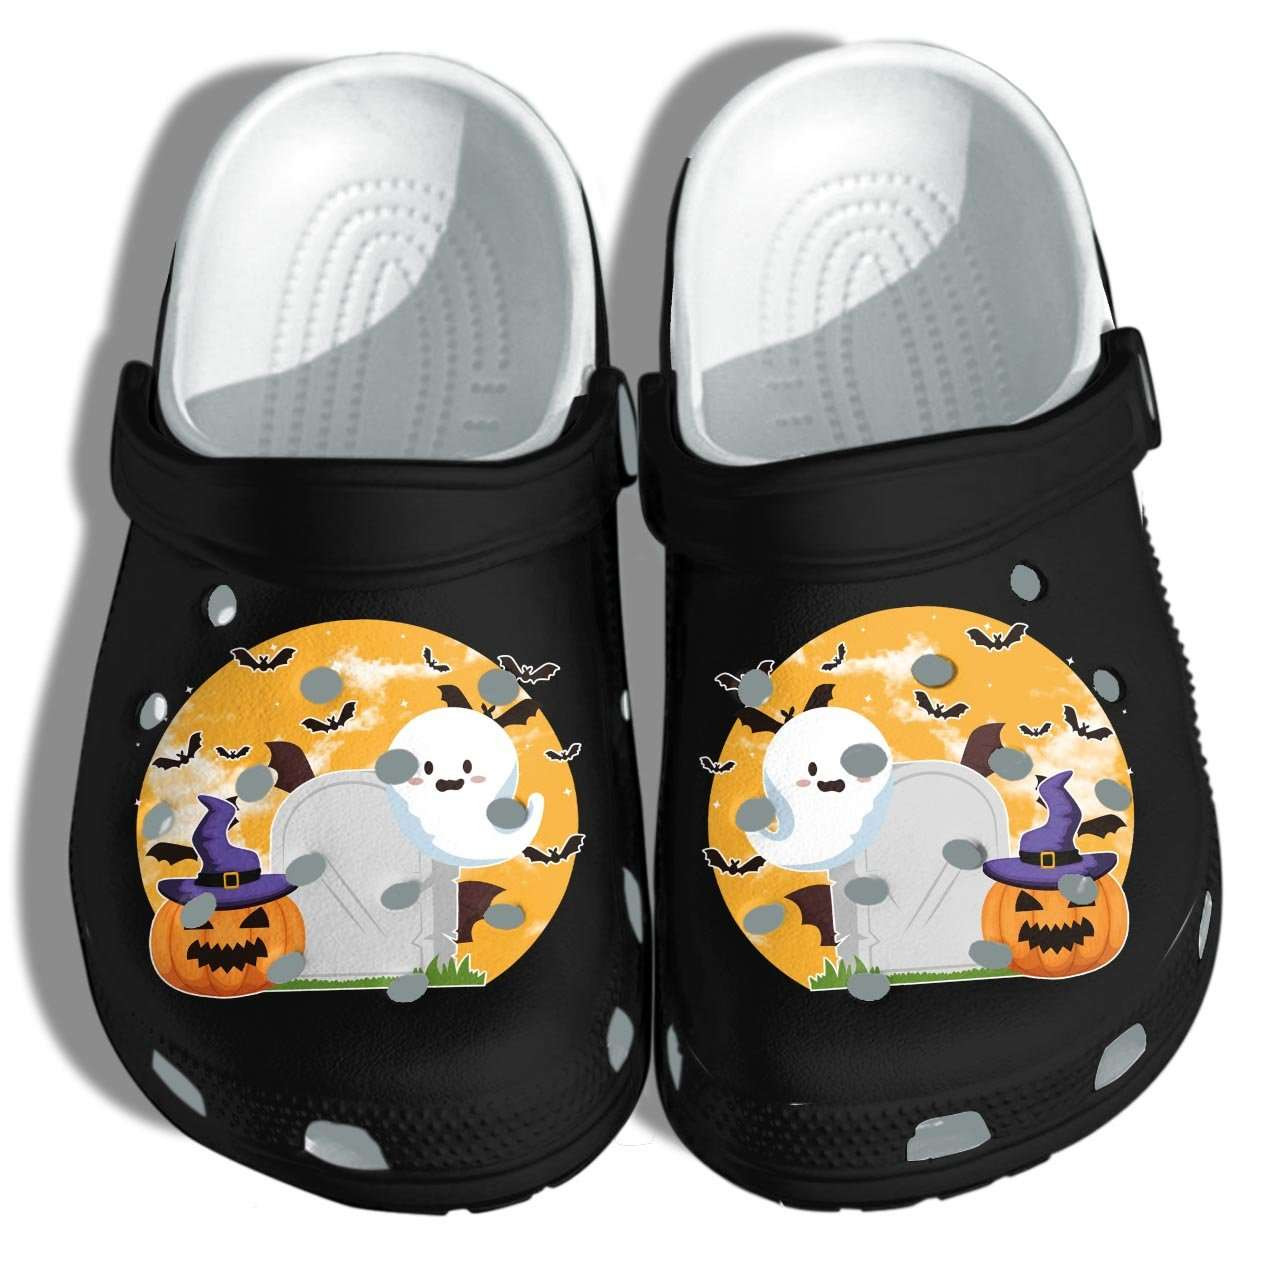 Happy Halloween With Ghost Crocs Crocband Clogs Shoes